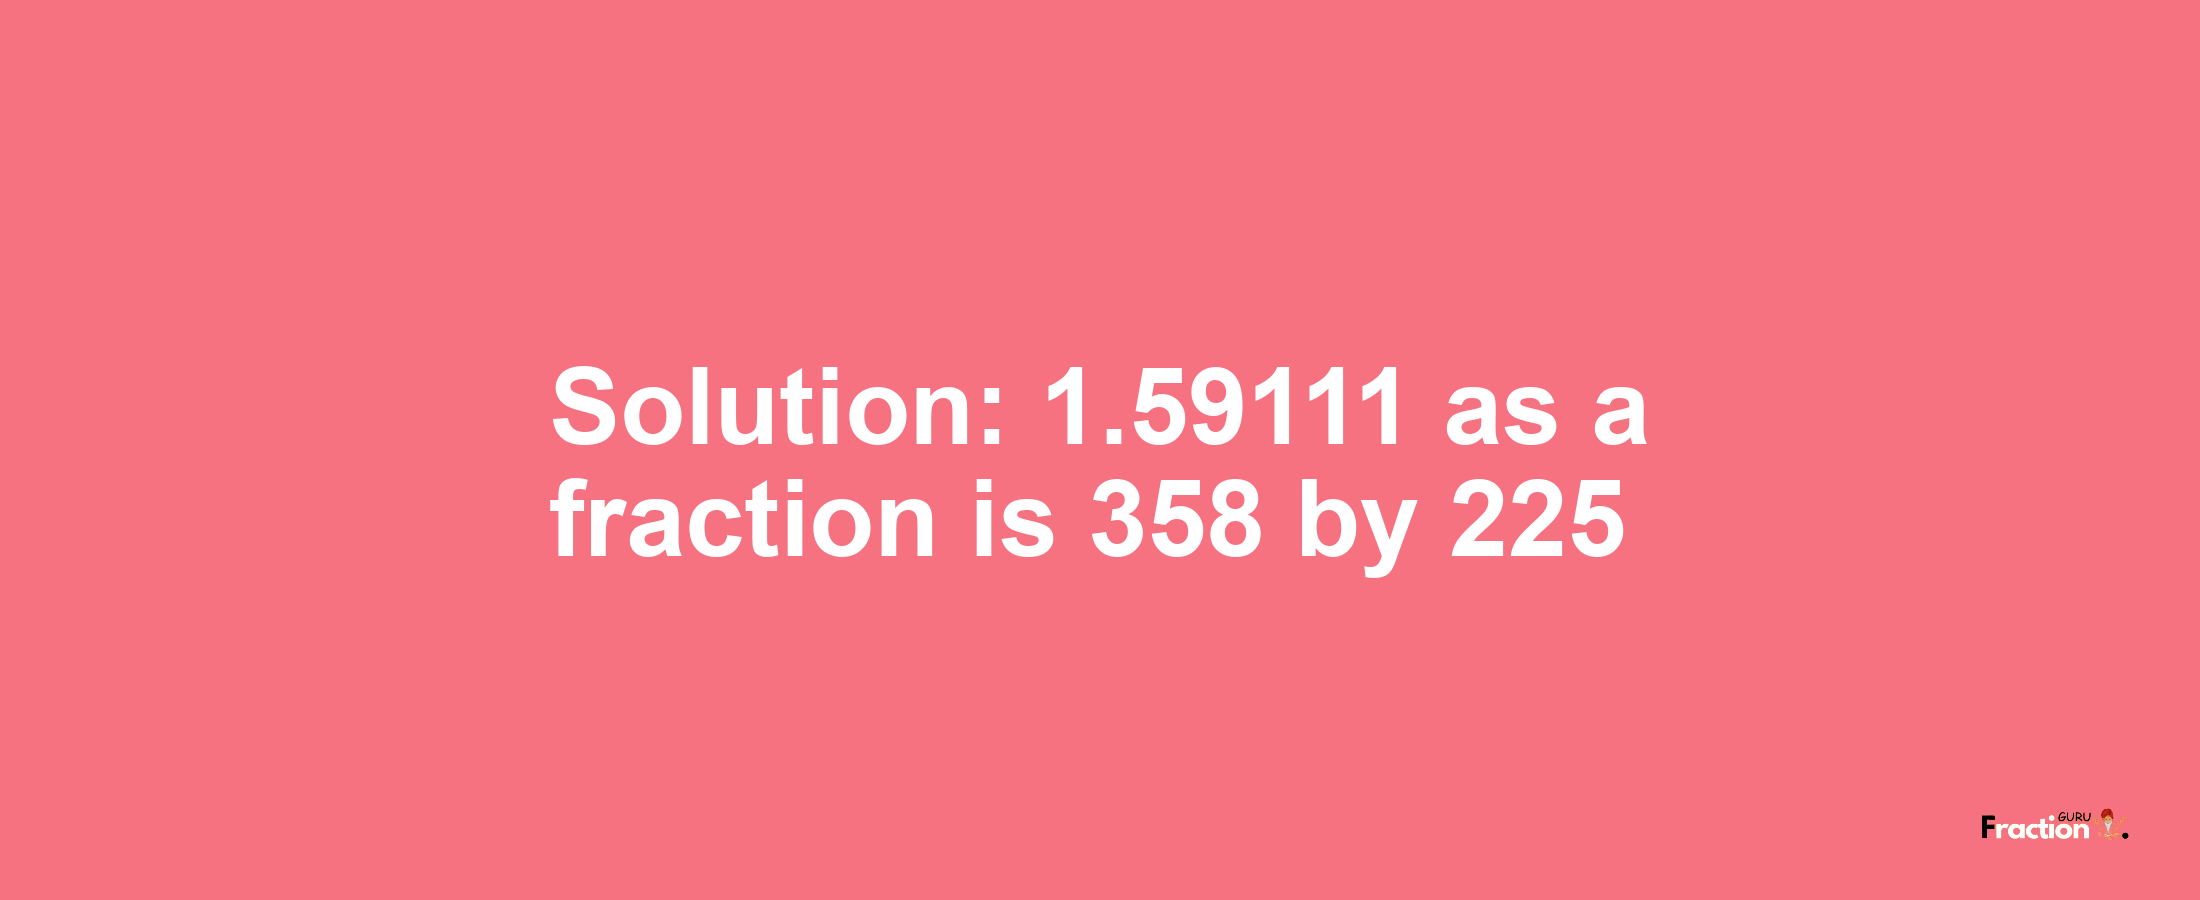 Solution:1.59111 as a fraction is 358/225